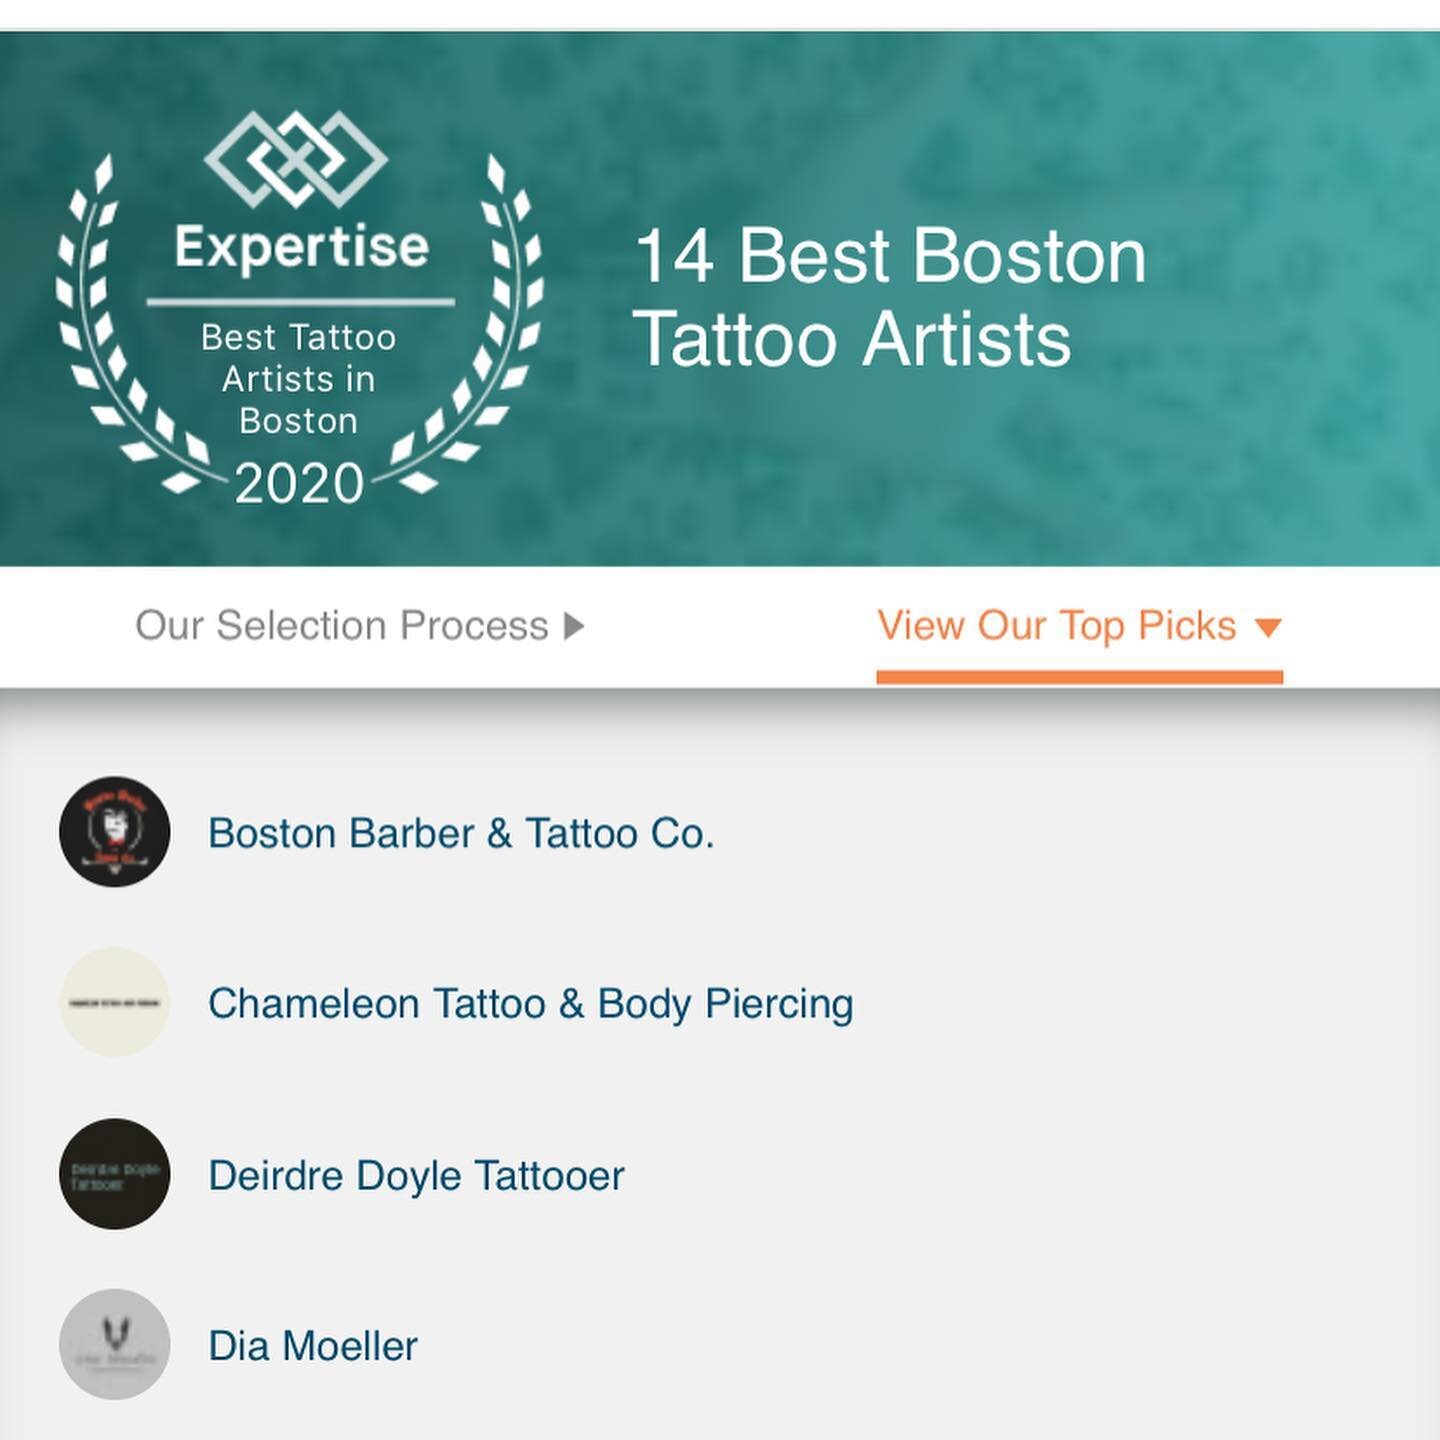 Thanks @expertiselocal for naming us one of the best tattoo shops in Boston once again! 🙏💈💉 ⁣
.⁣
.⁣
.⁣
.⁣
.⁣
#tattoos #neojapanese #inked #instaart #illustration #ink #customtattoo #rosetattoo #tattooartist #linework #blackandgreytattoos #tattooar